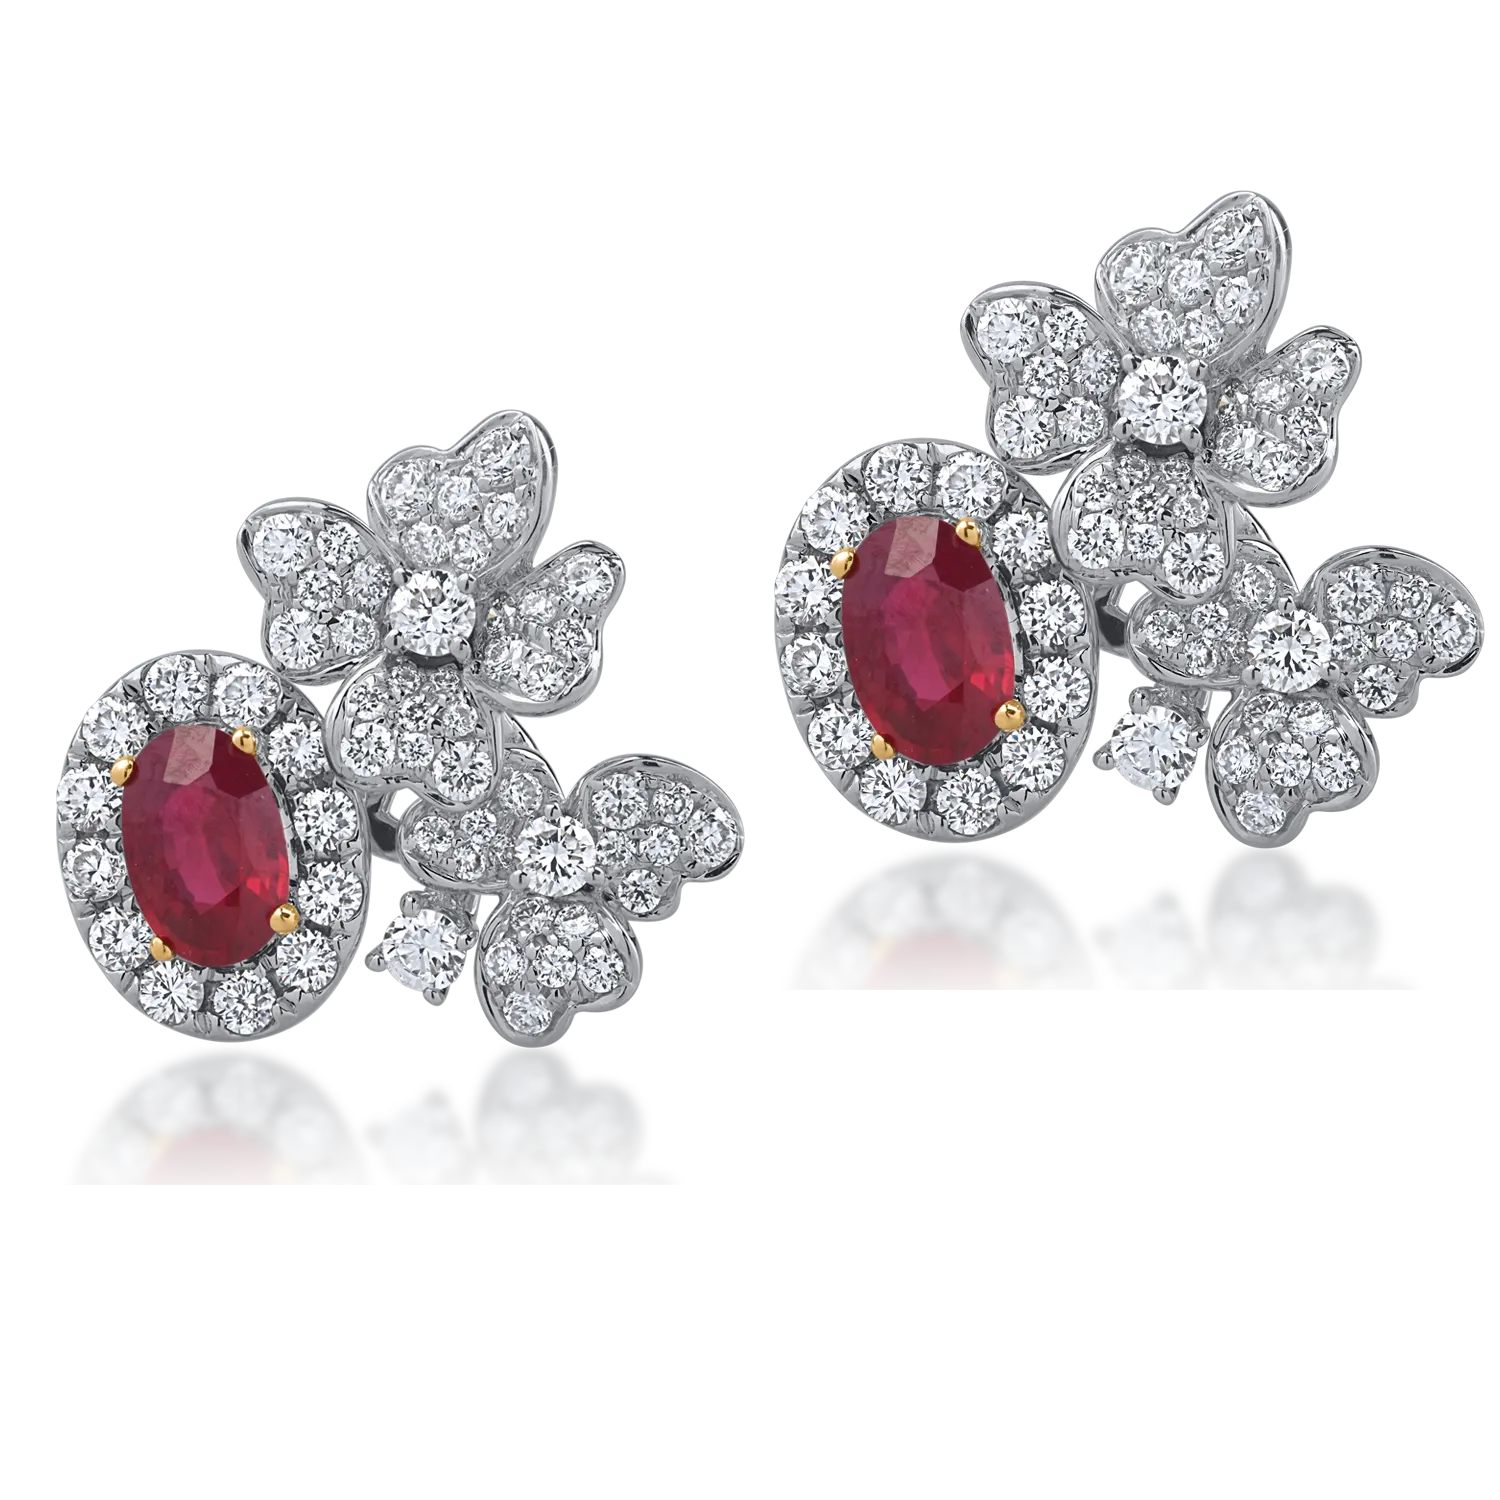 White gold earrings with 1.31ct diamonds and 1.09ct rubies